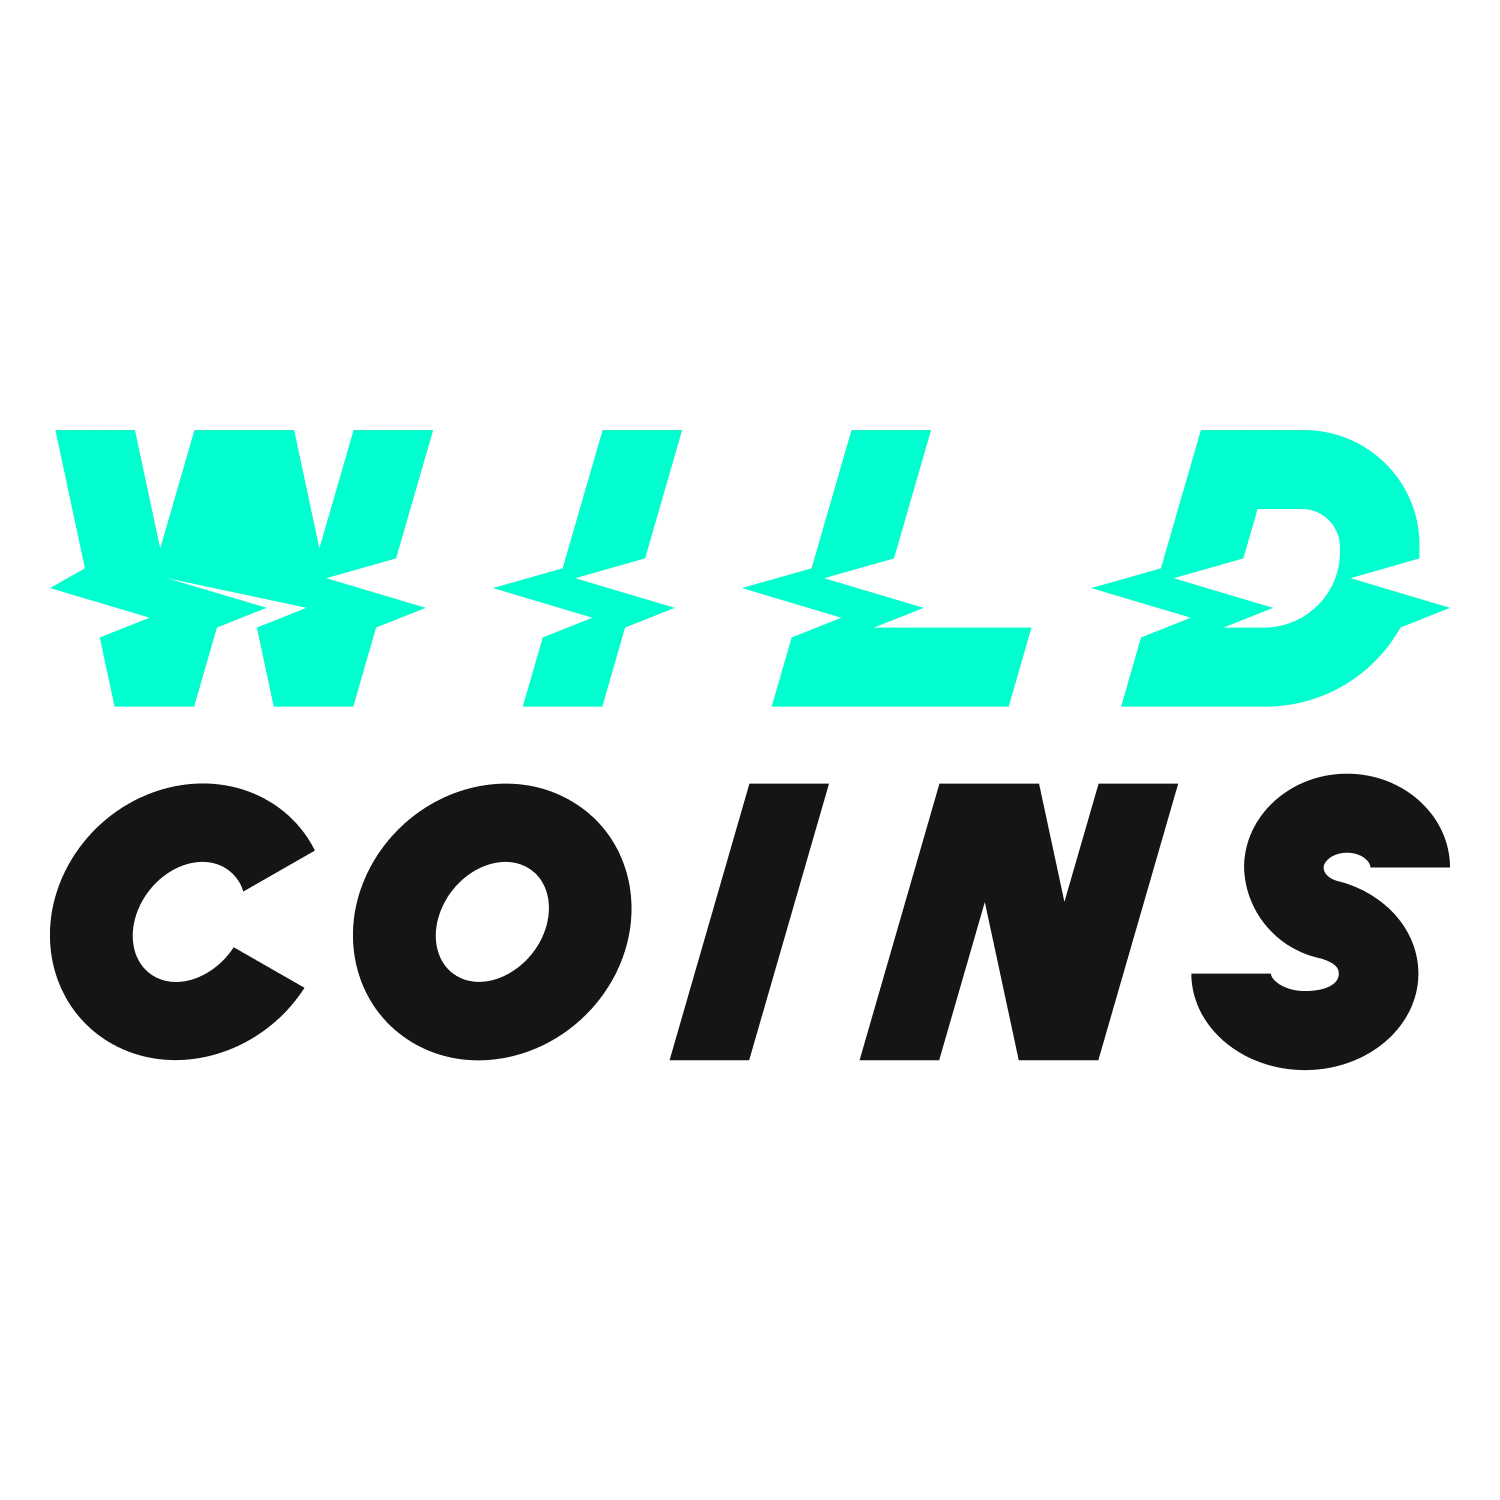 Place bets at Wild Coins crypto casino.